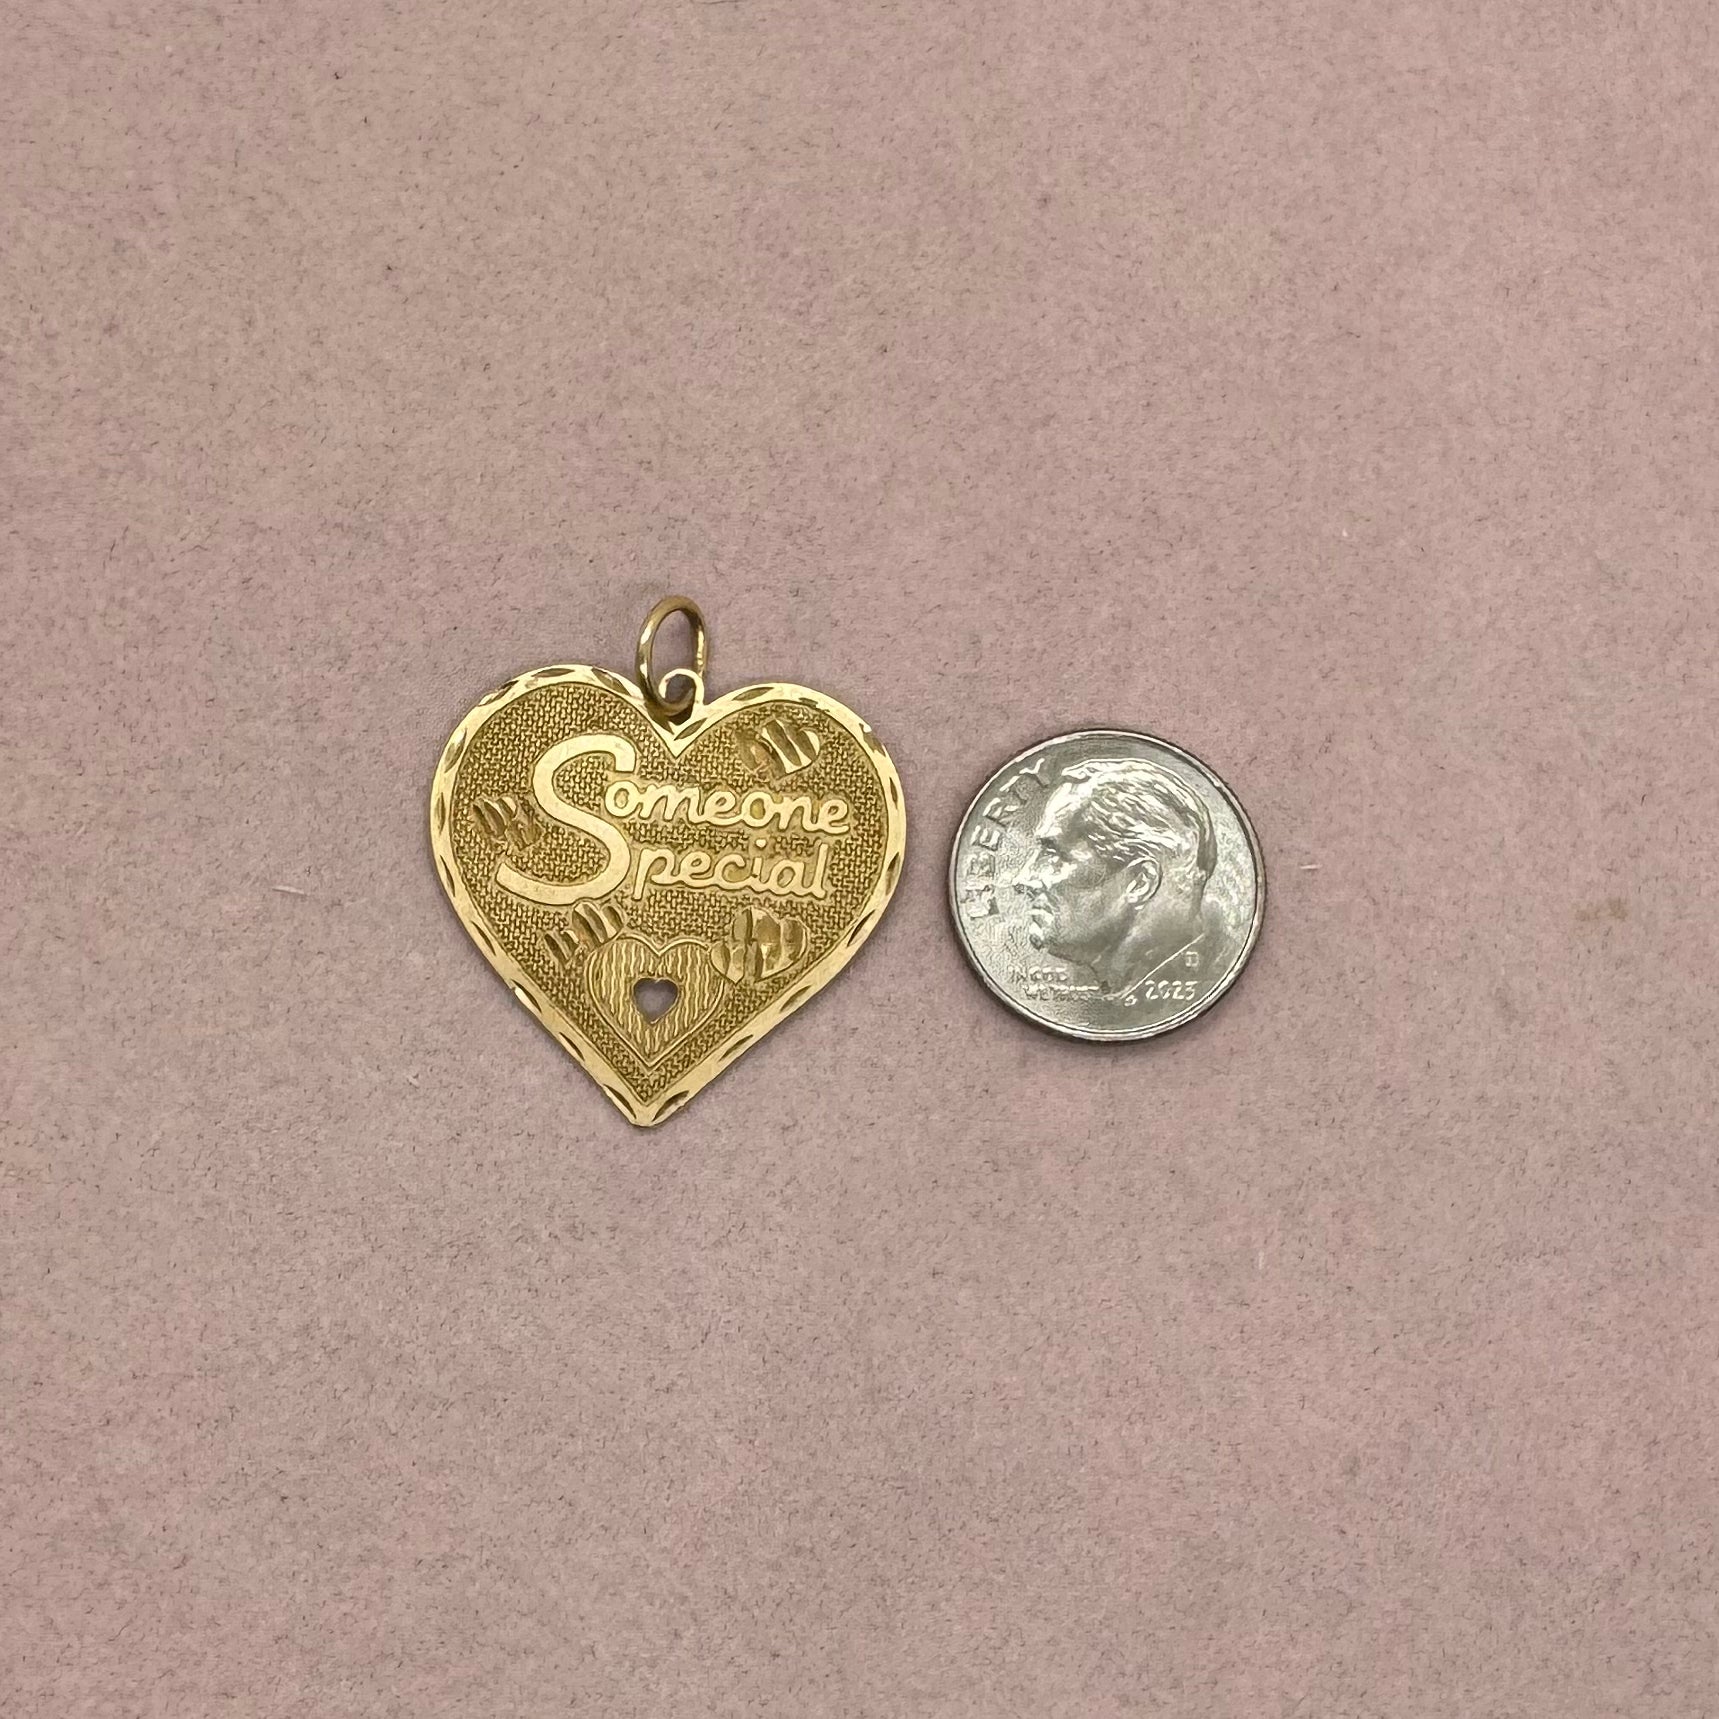 Someone Special Heart with Engraving by Michael Anthony